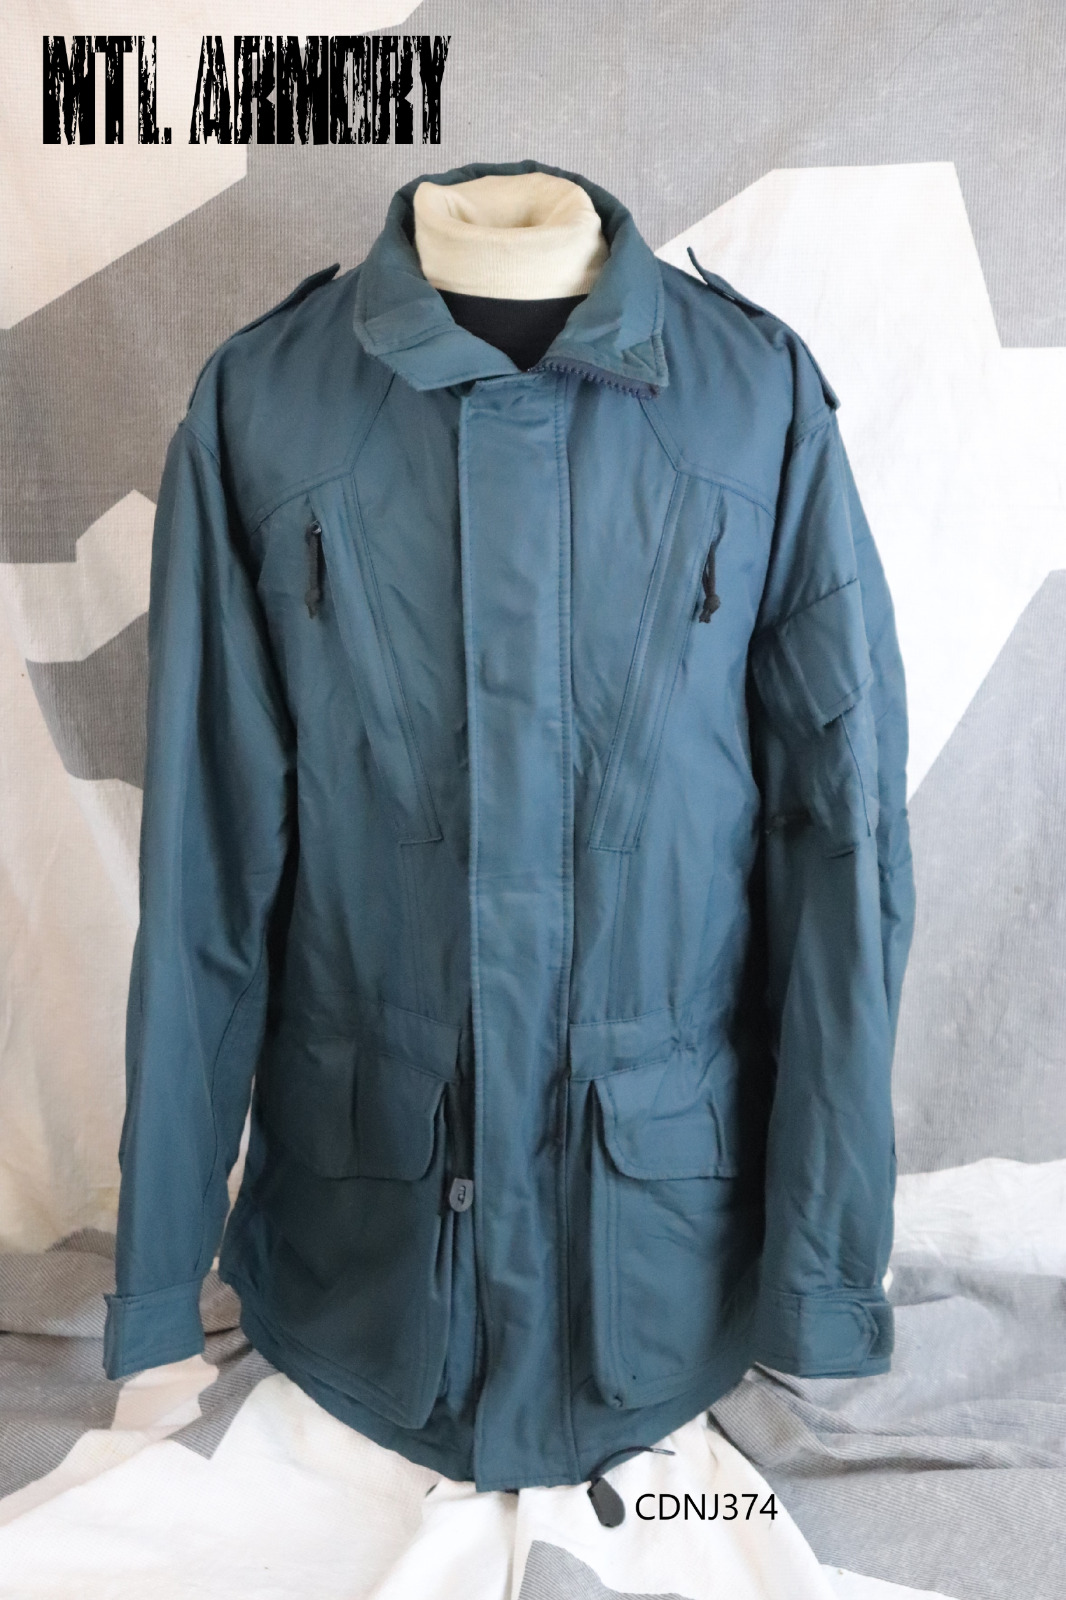 ROYAL CANADIAN AIR FORCE BLUE GORE-TEX JACKET  SIZE 7640 RCAF